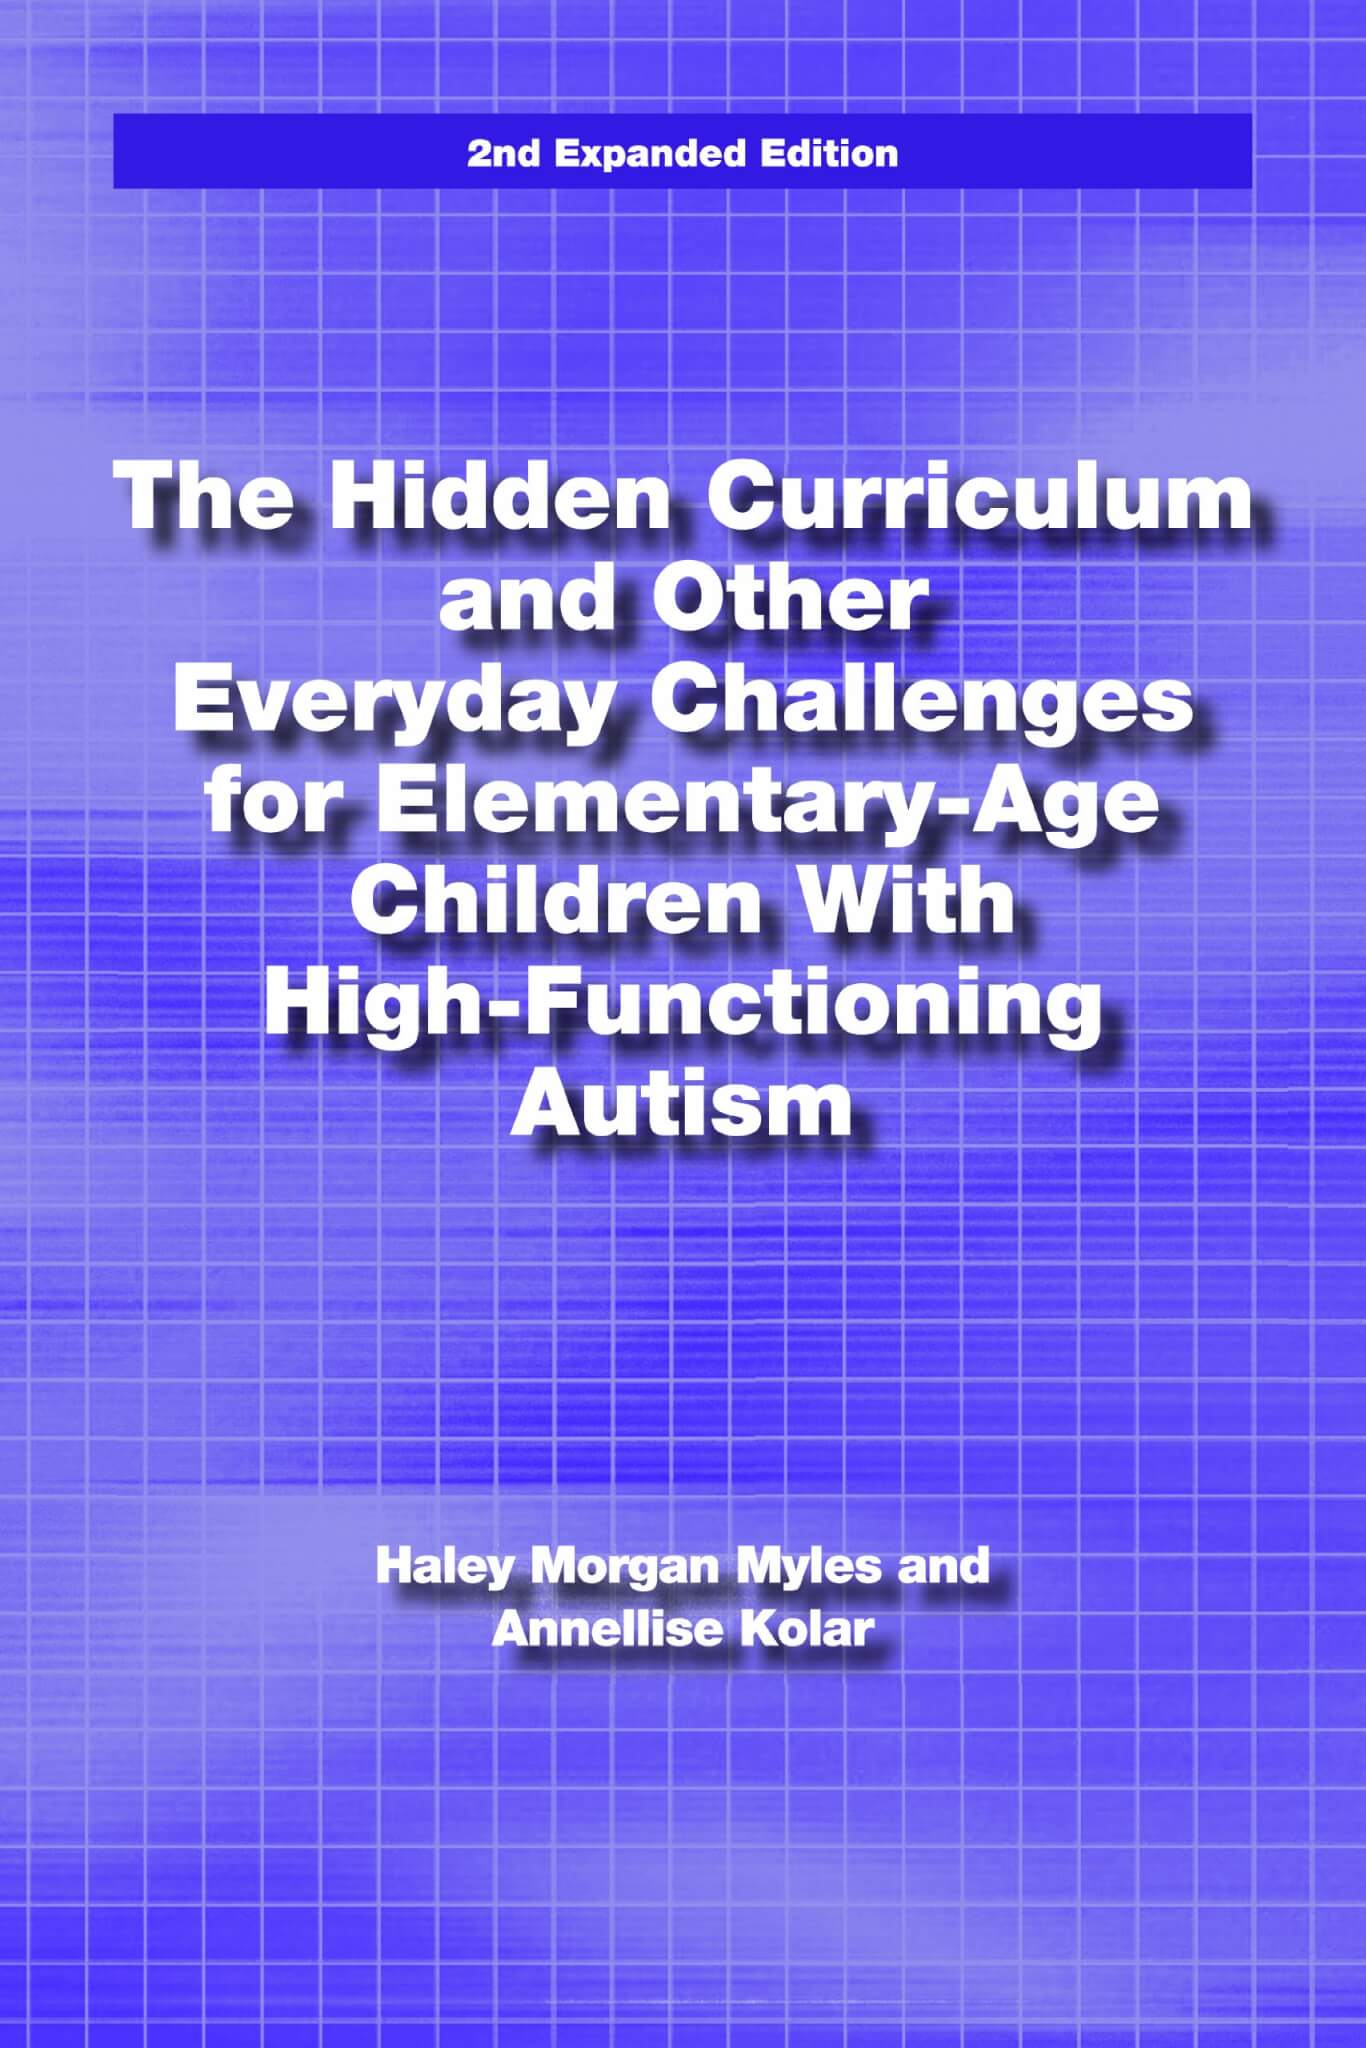 The Hidden Curriculum and Other Everyday Challenges for Elementary-Age Children With High-Functioning Autism